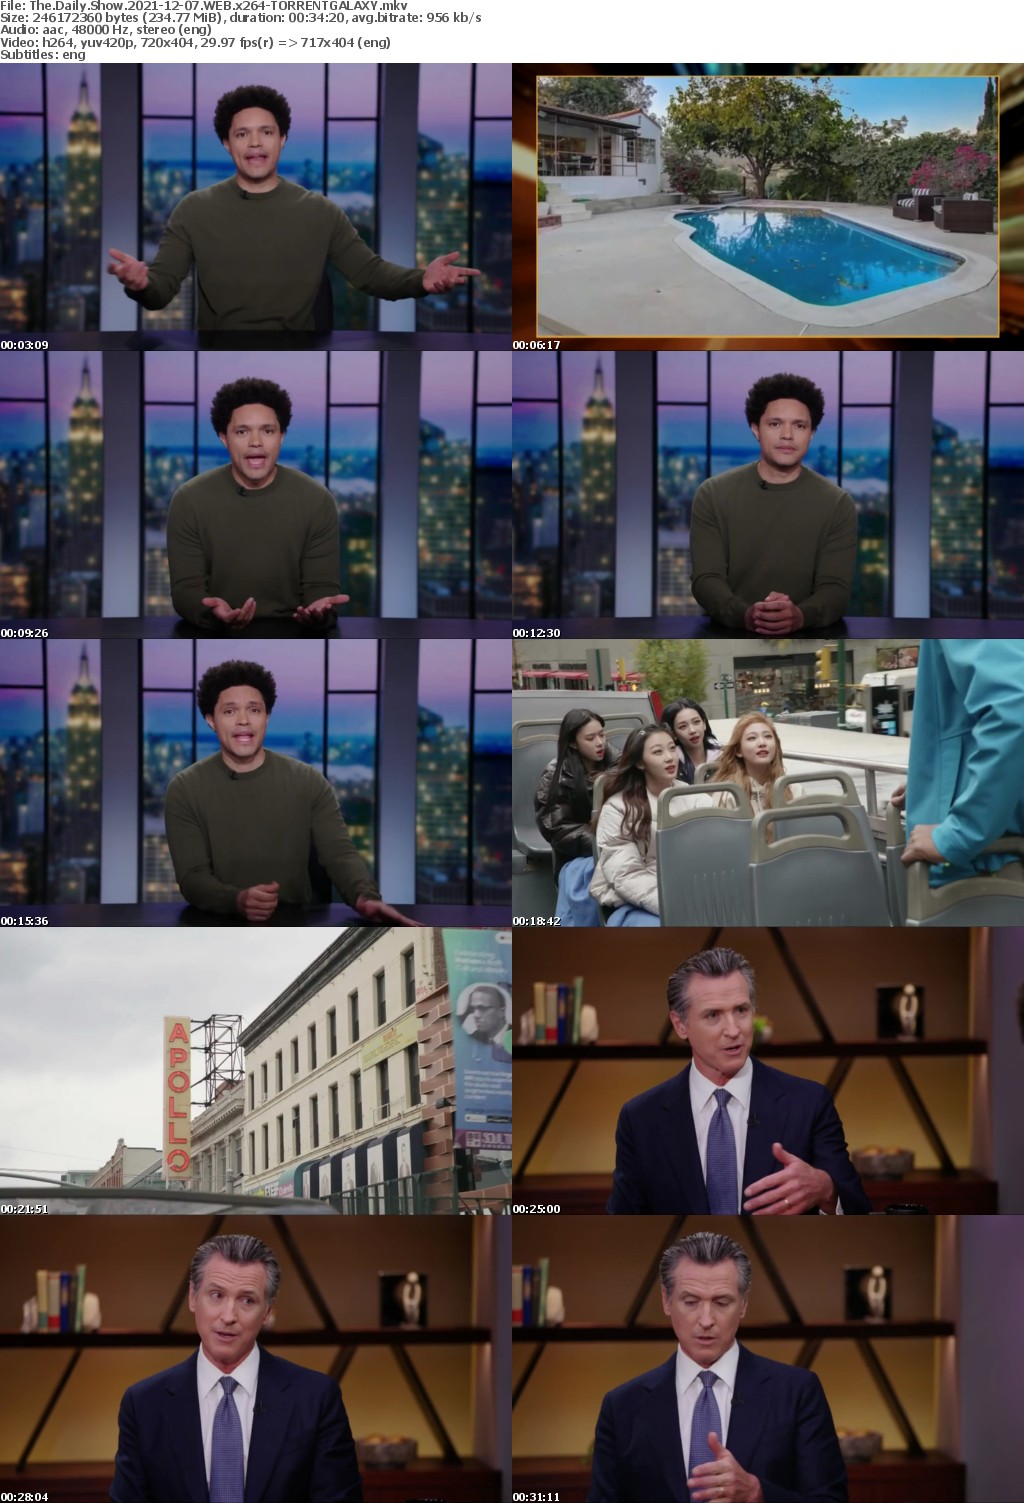 The Daily Show 2021-12-07 WEB x264-GALAXY